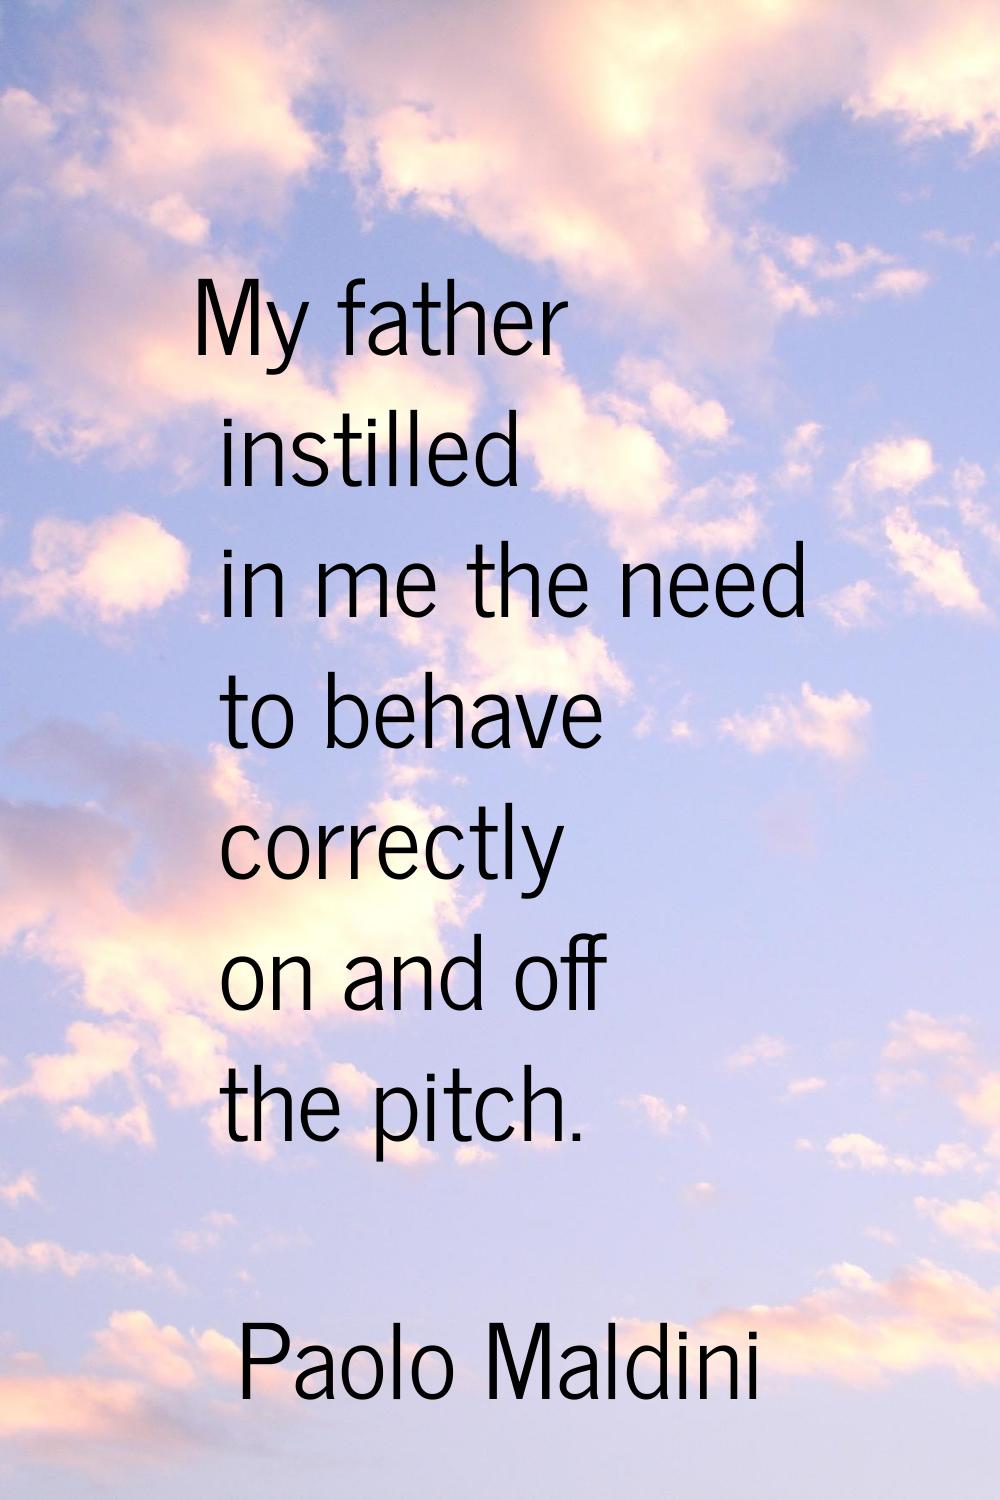 My father instilled in me the need to behave correctly on and off the pitch.